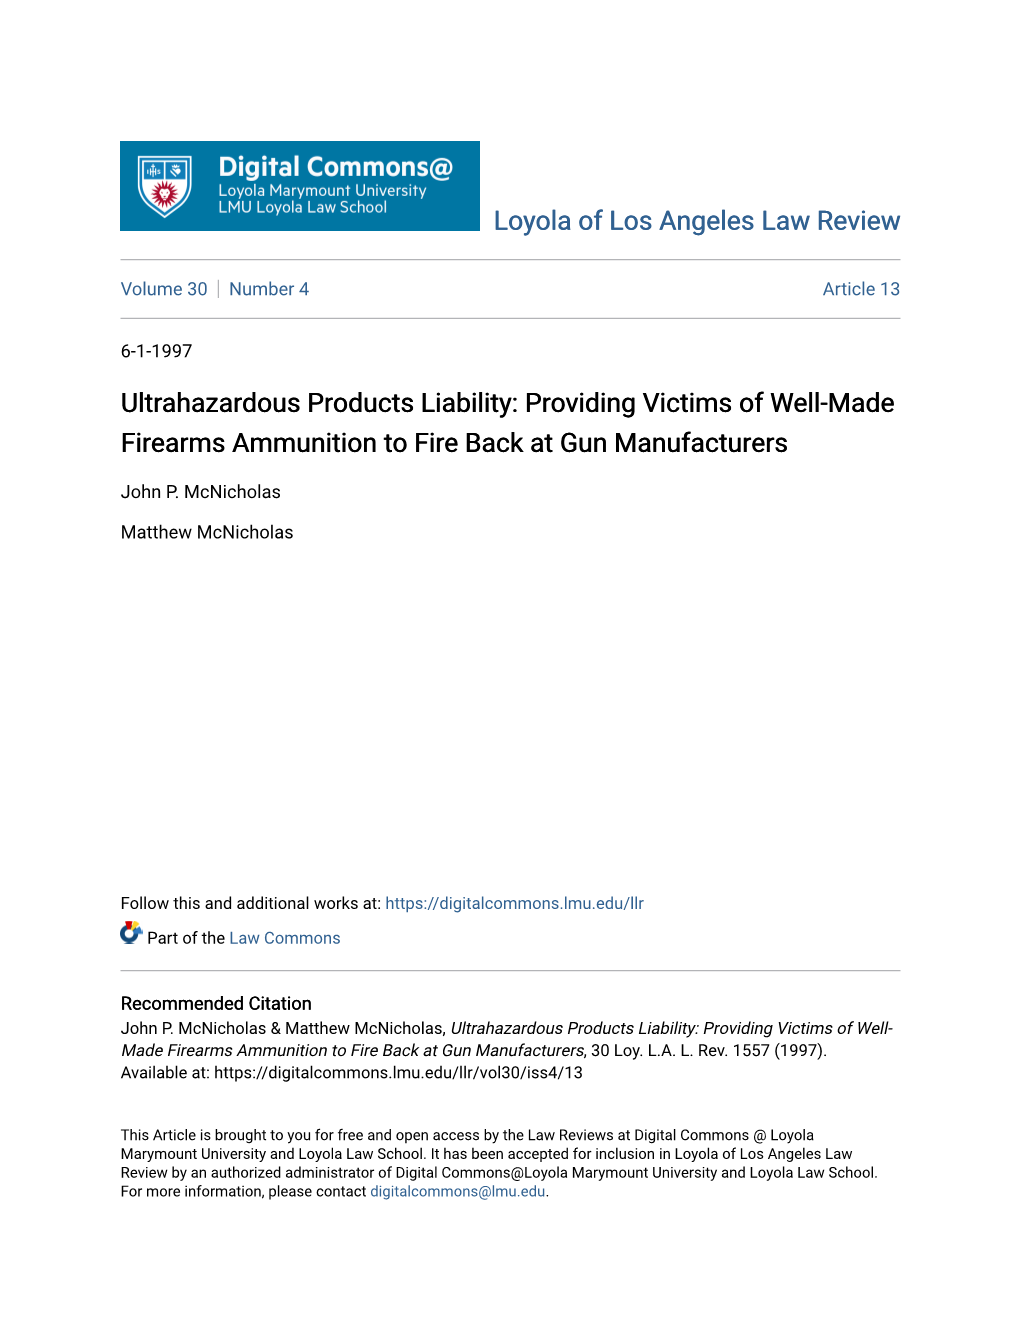 Ultrahazardous Products Liability: Providing Victims of Well-Made Firearms Ammunition to Fire Back at Gun Manufacturers